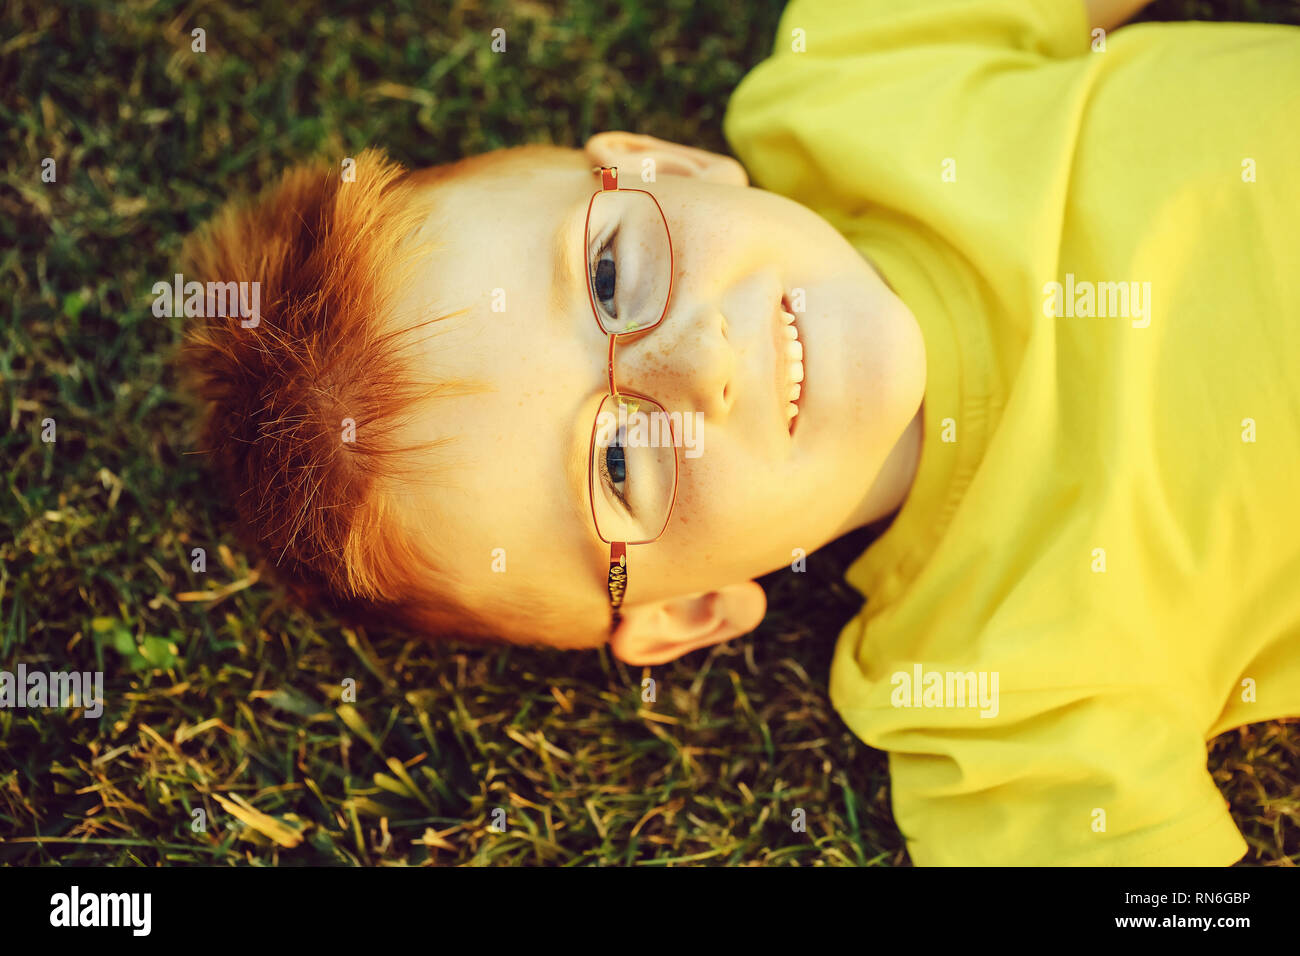 Happy baby boy with red hair in glasses on grass Stock Photo - Alamy